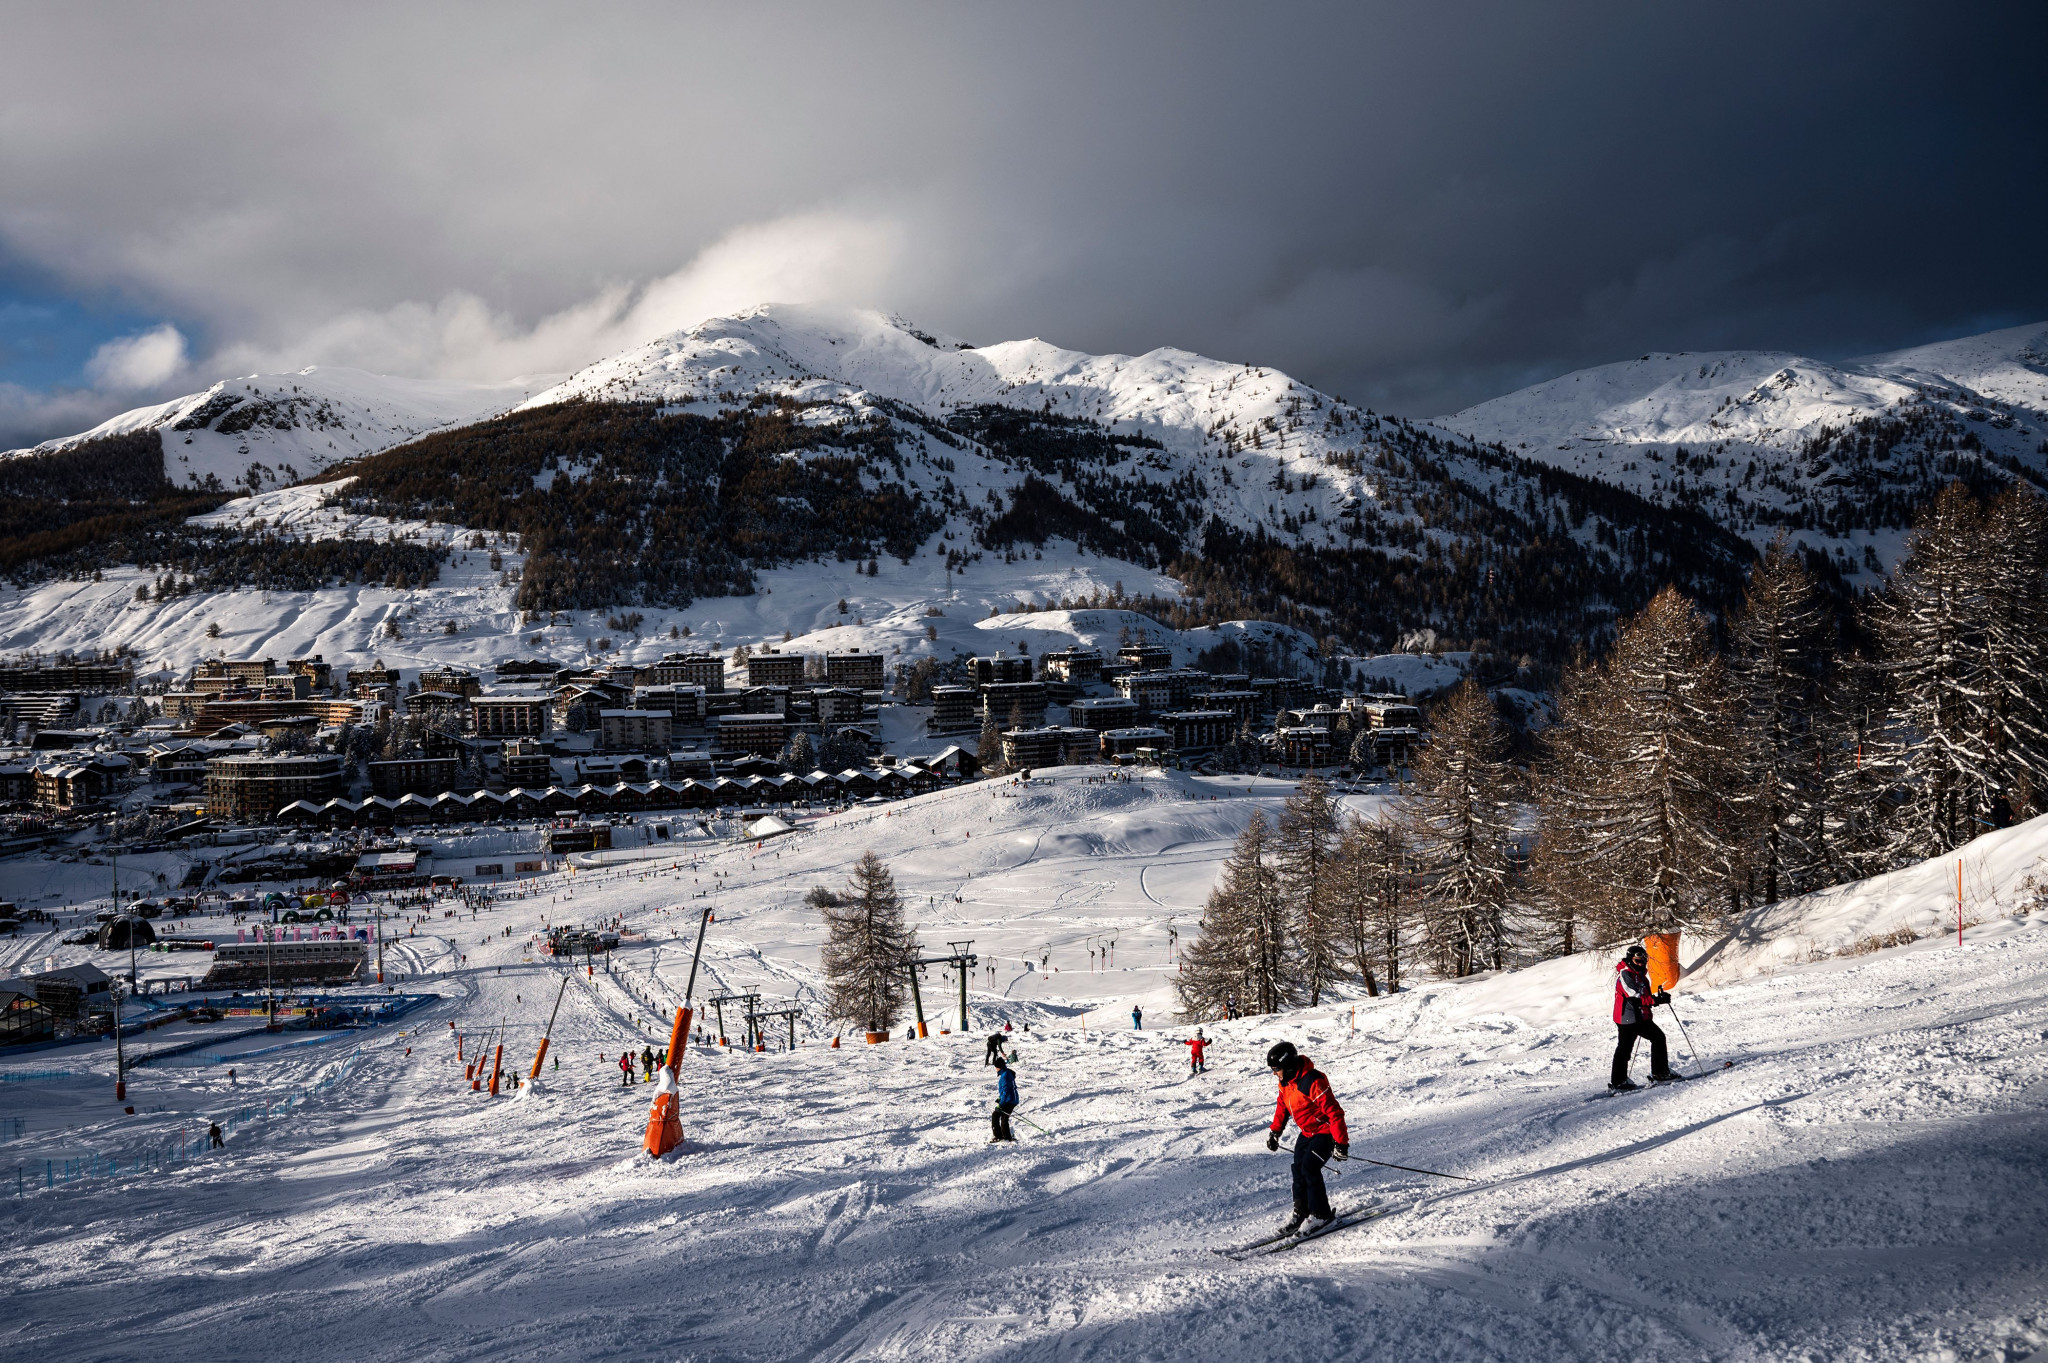  With less than three years until the Milan Cortina 2026 Winter Olympic and Paralympic Games, Italy's ski industry is reliant on artificial snow due to the climate change crisis ©Getty Images